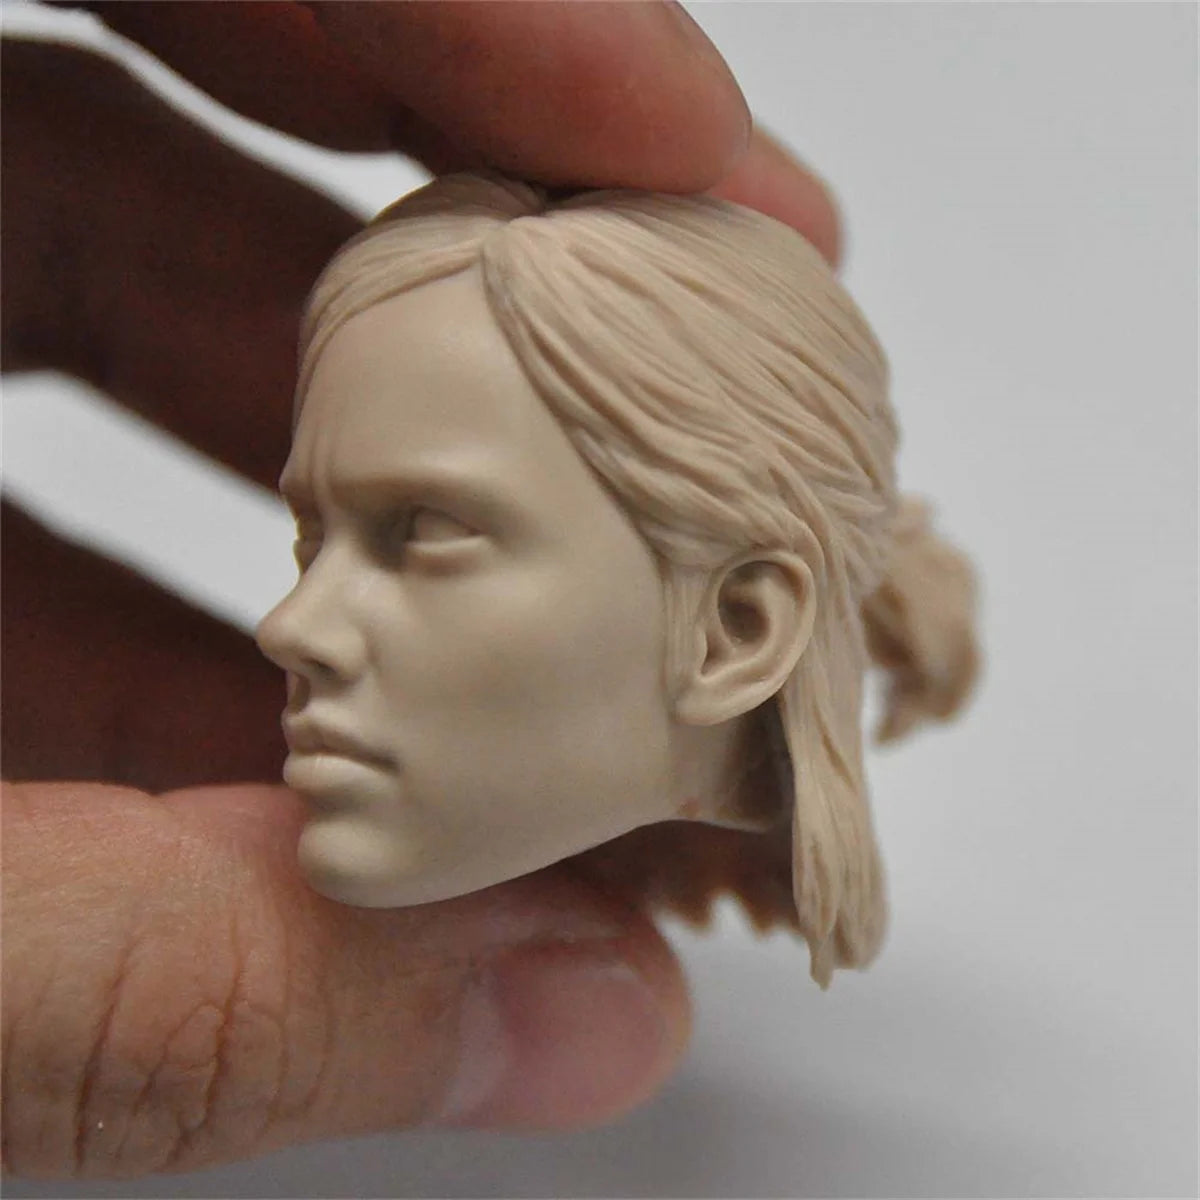 The Last of Us Ellie's Unpanited Carved Head Fits on Pencil - Available at 2Fast2See.co